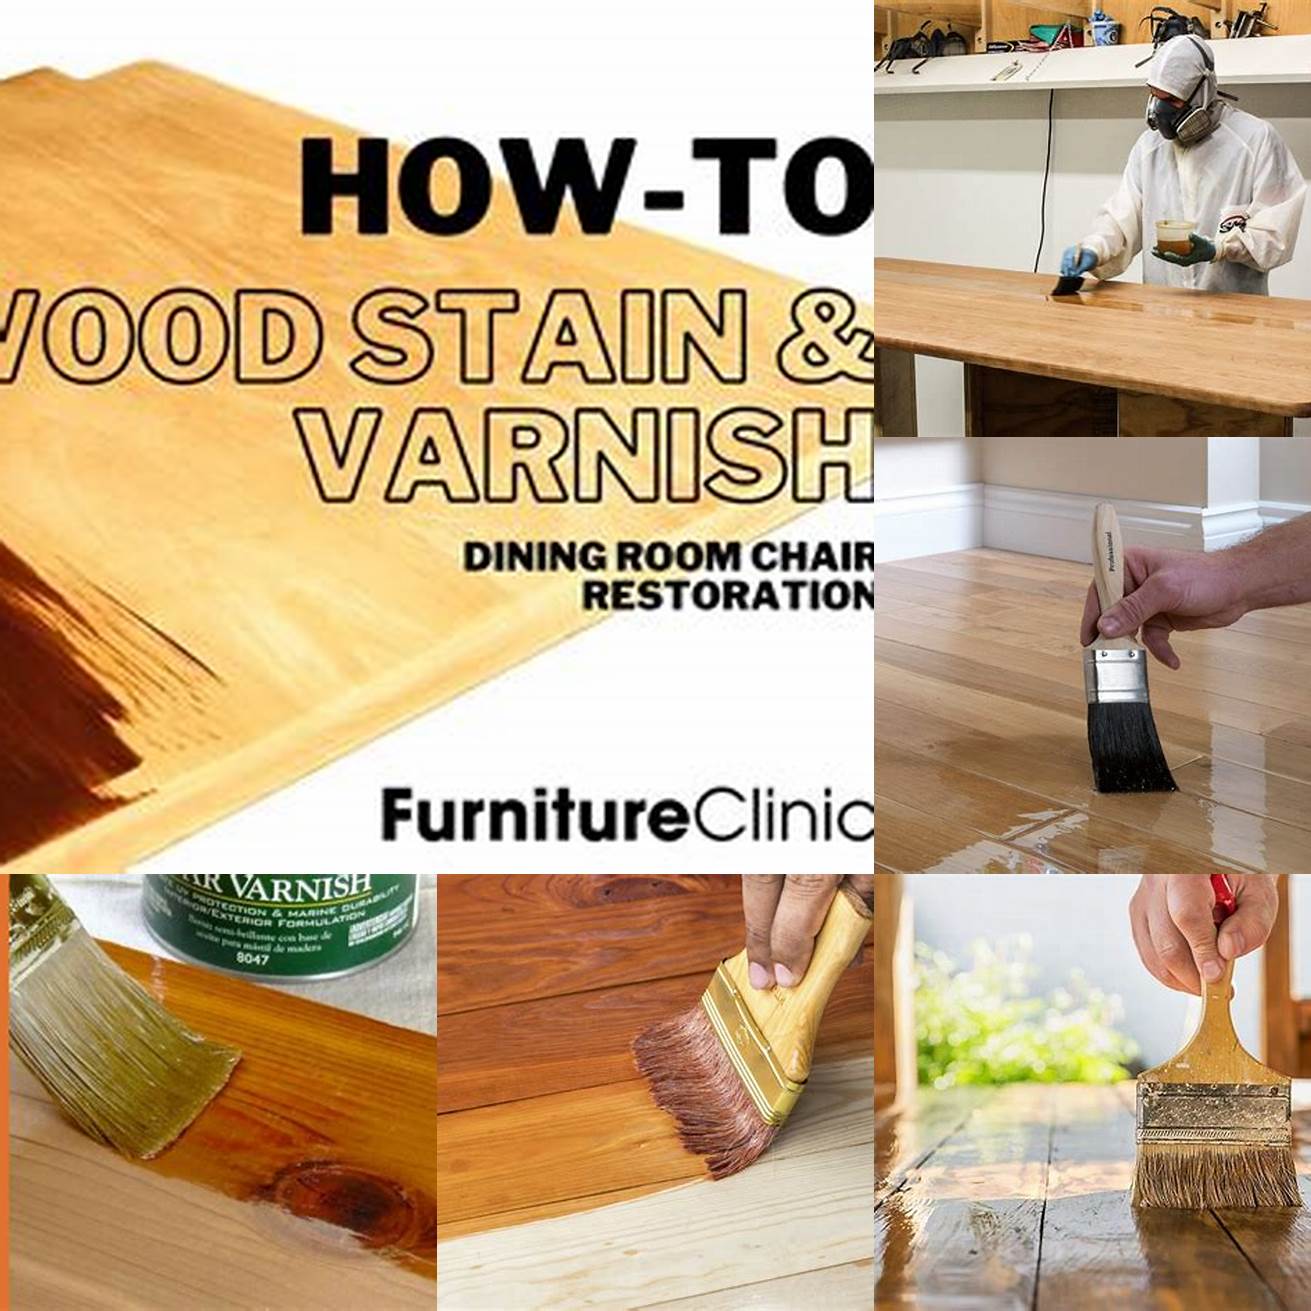 Selecting the Right Varnish